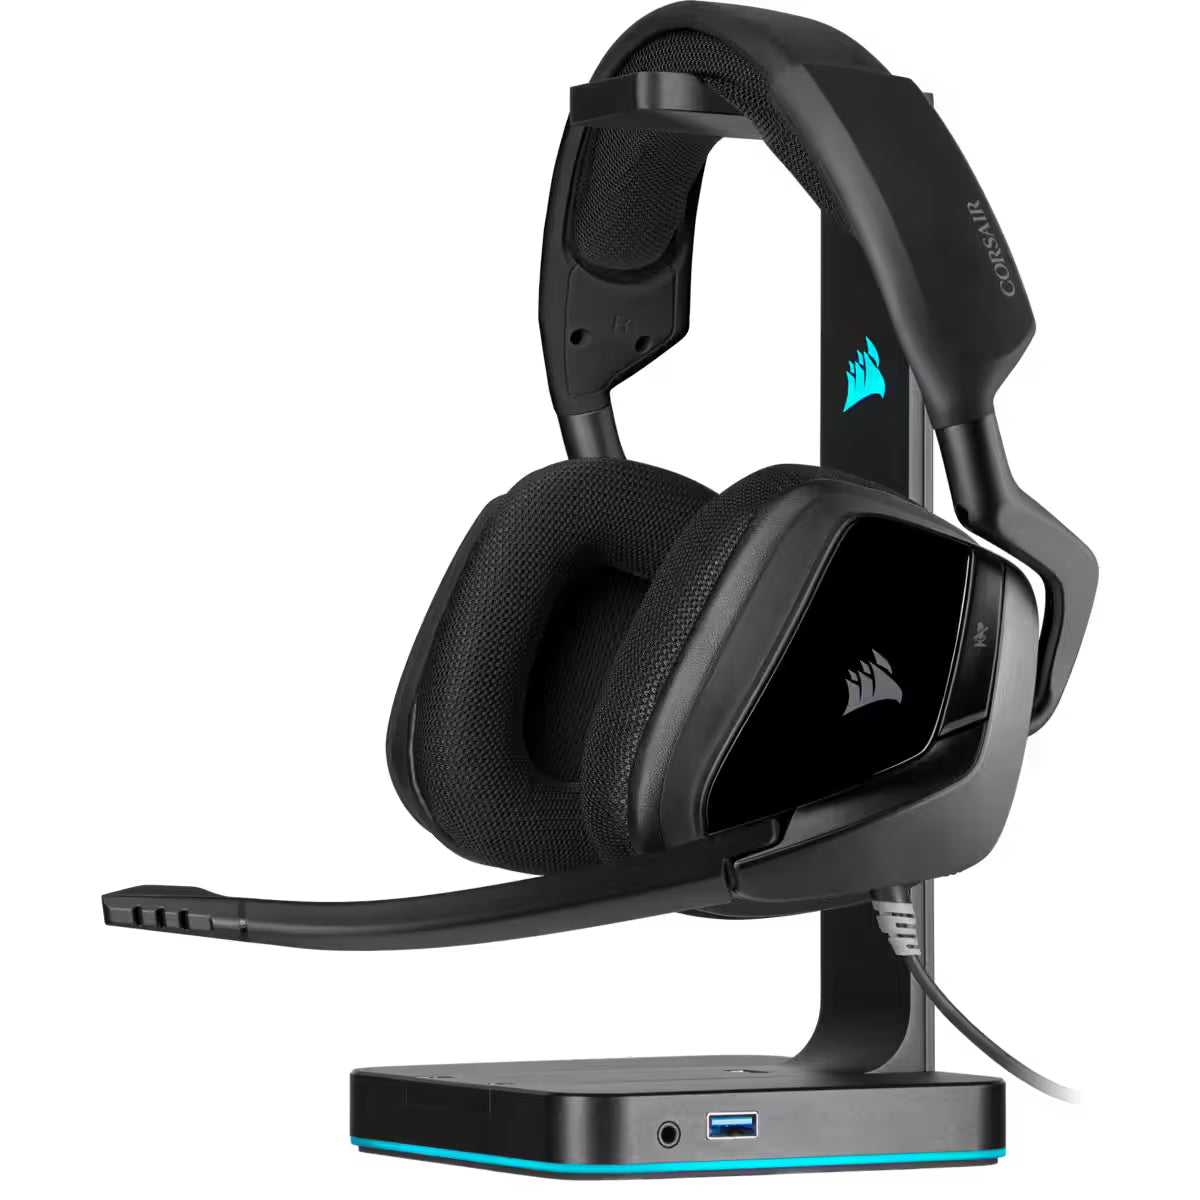 CORSAIR Void Elite Premium Gaming Headset with 7.1 Surround Sound, Flip-Up to Mute Omnidirectional Microphone, iCUE EQ Equalizer App Support and USB Adapter for PC Computer Laptop Gaming Consoles (Carbon) | CA-9011205-AP